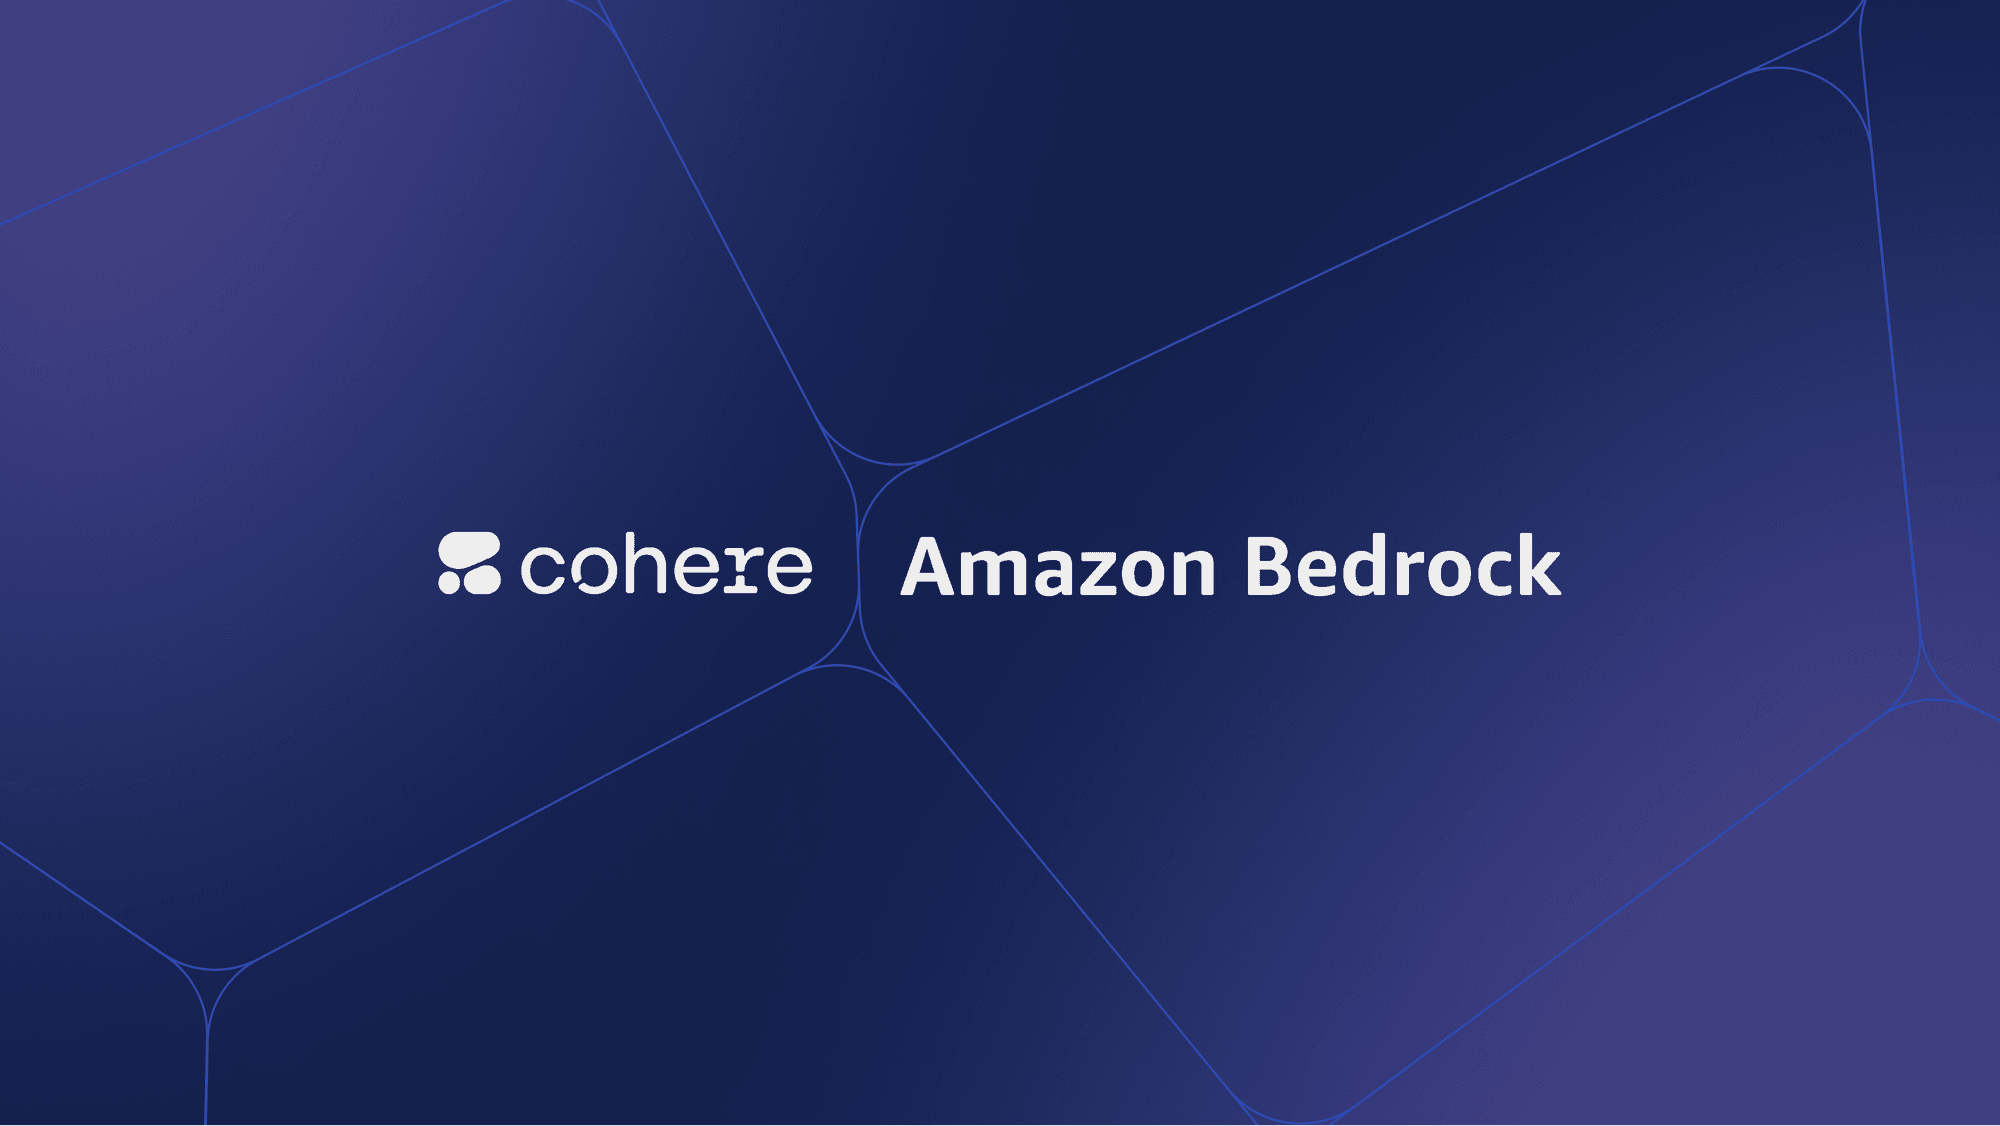 Cohere Brings its Enterprise AI Offering to Amazon Bedrock